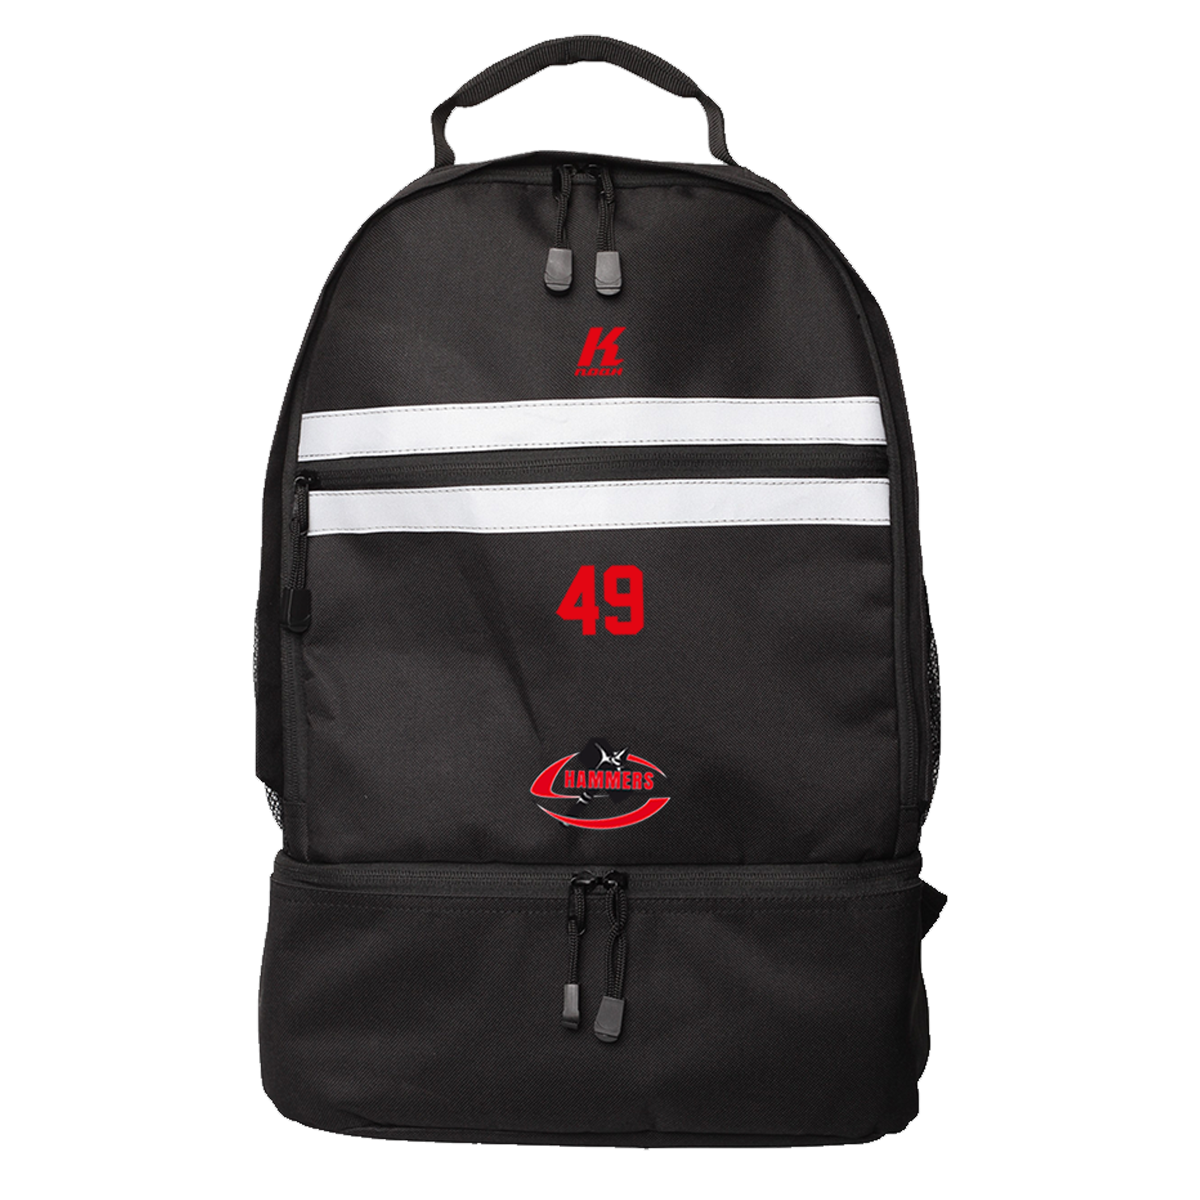 S-Hammers Players Backpack with Playernumber or Initials